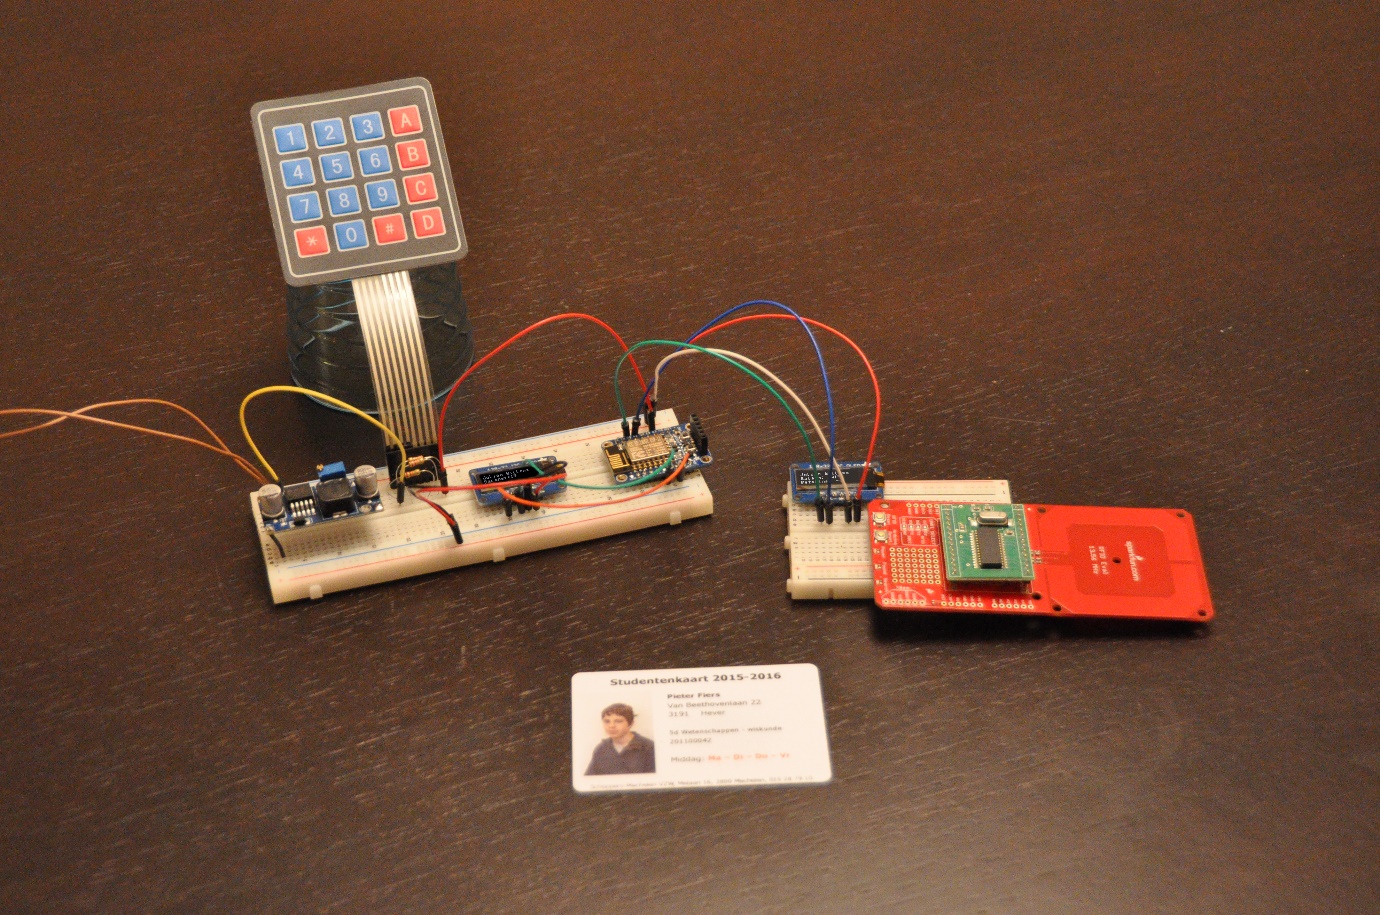 Picture of the hardware of the DSpay prototype on a table, showing a keypad,
microcontroller, small matrix display and an NFC reader